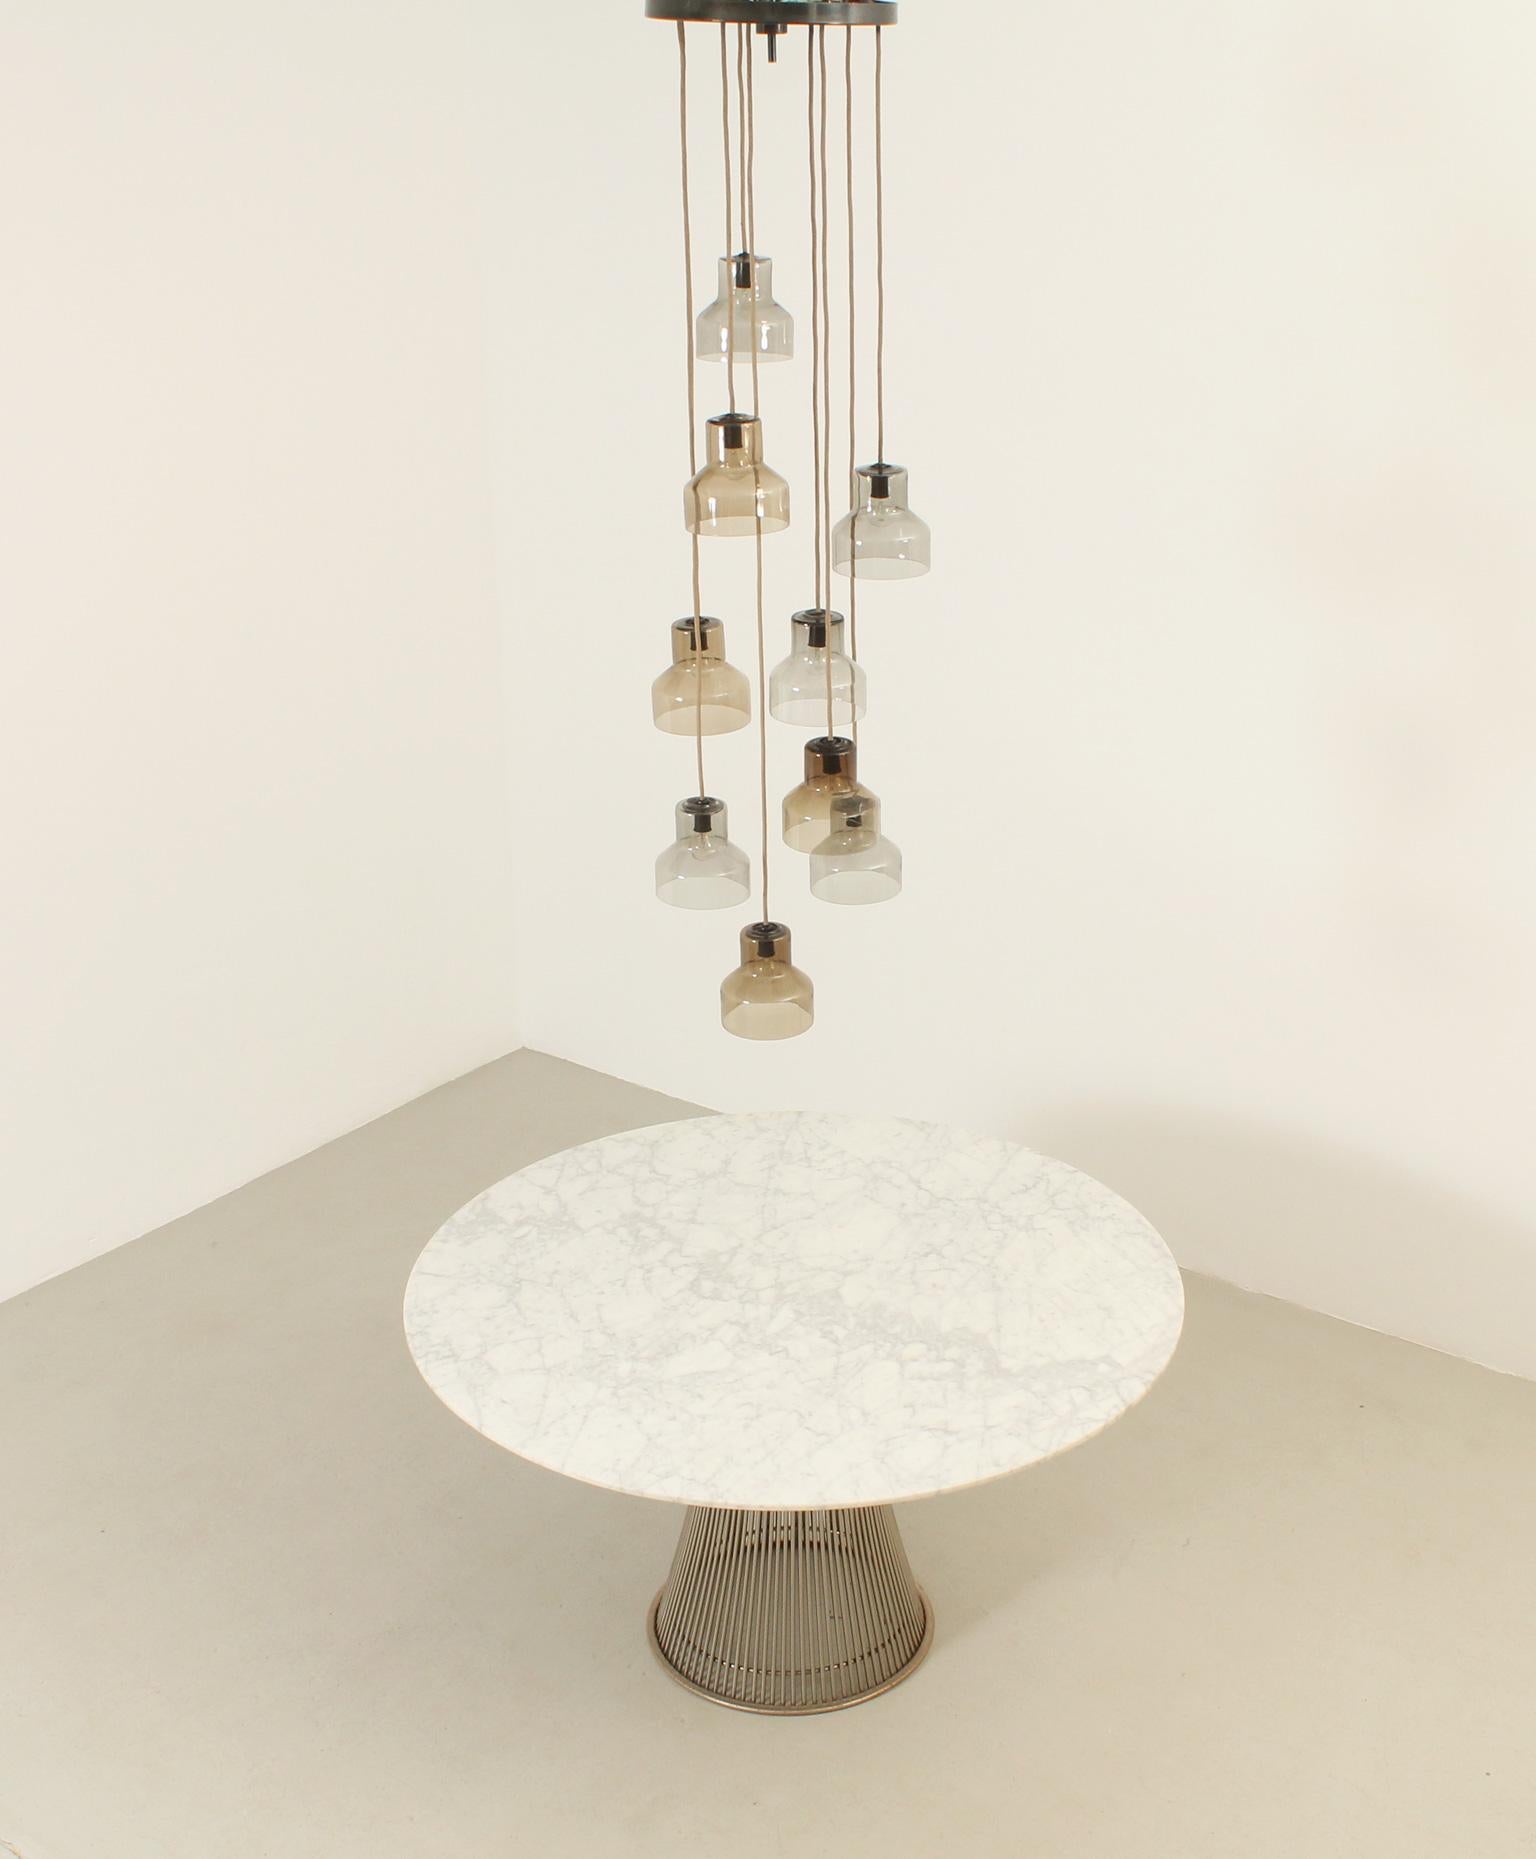 Large Cascade Ceiling Lamp by Peter Pelzel for Vistosi, Italy, 1962 For Sale 7